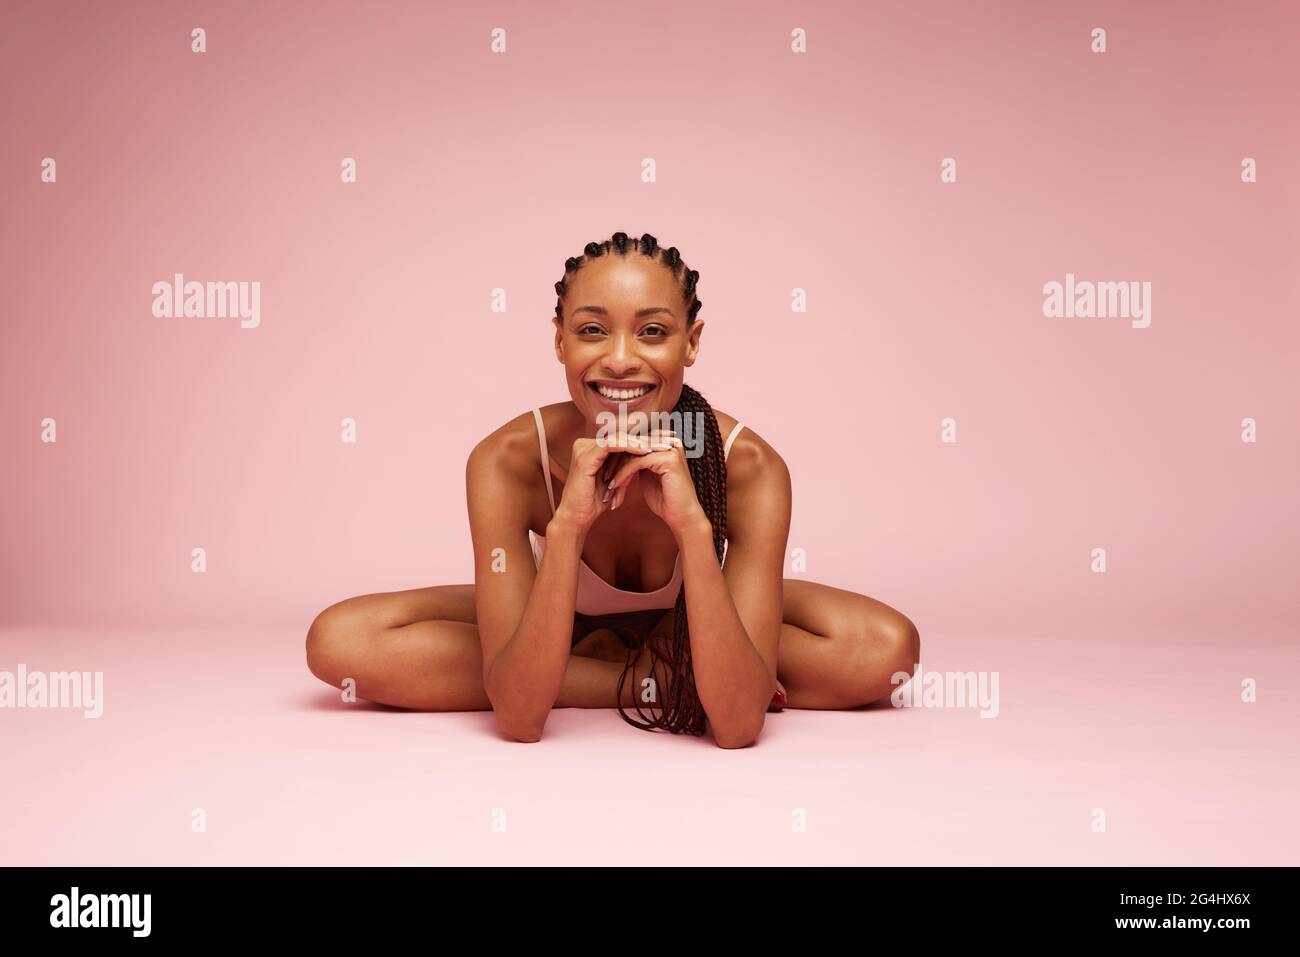 Pretty african woman sitting on floor with hand on chin. Female model looking at camera and smiling while sitting on pink background. Stock Photo